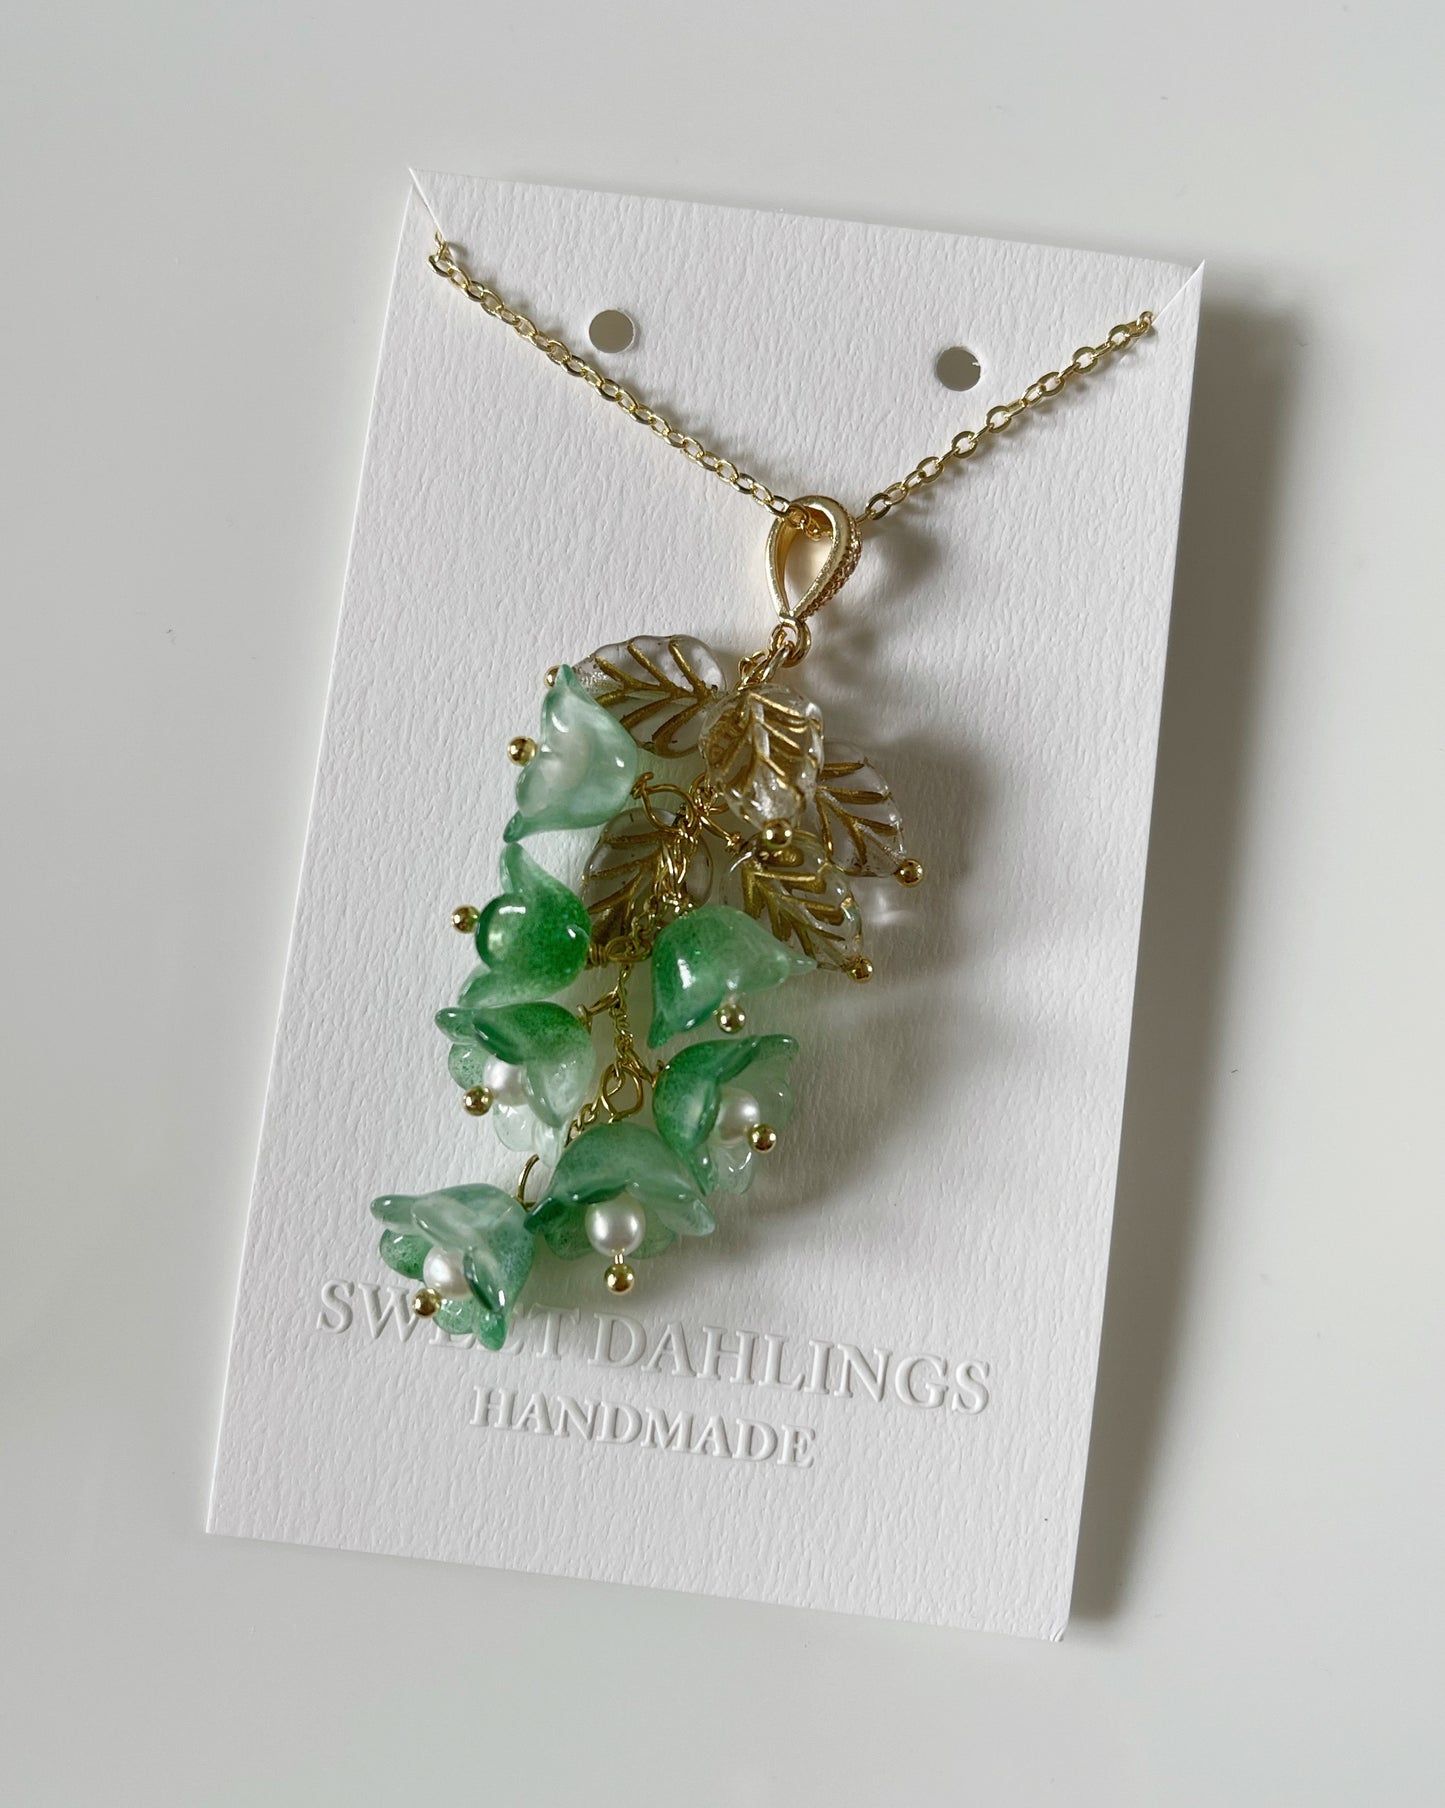 Canterbury bell flowers necklace in green